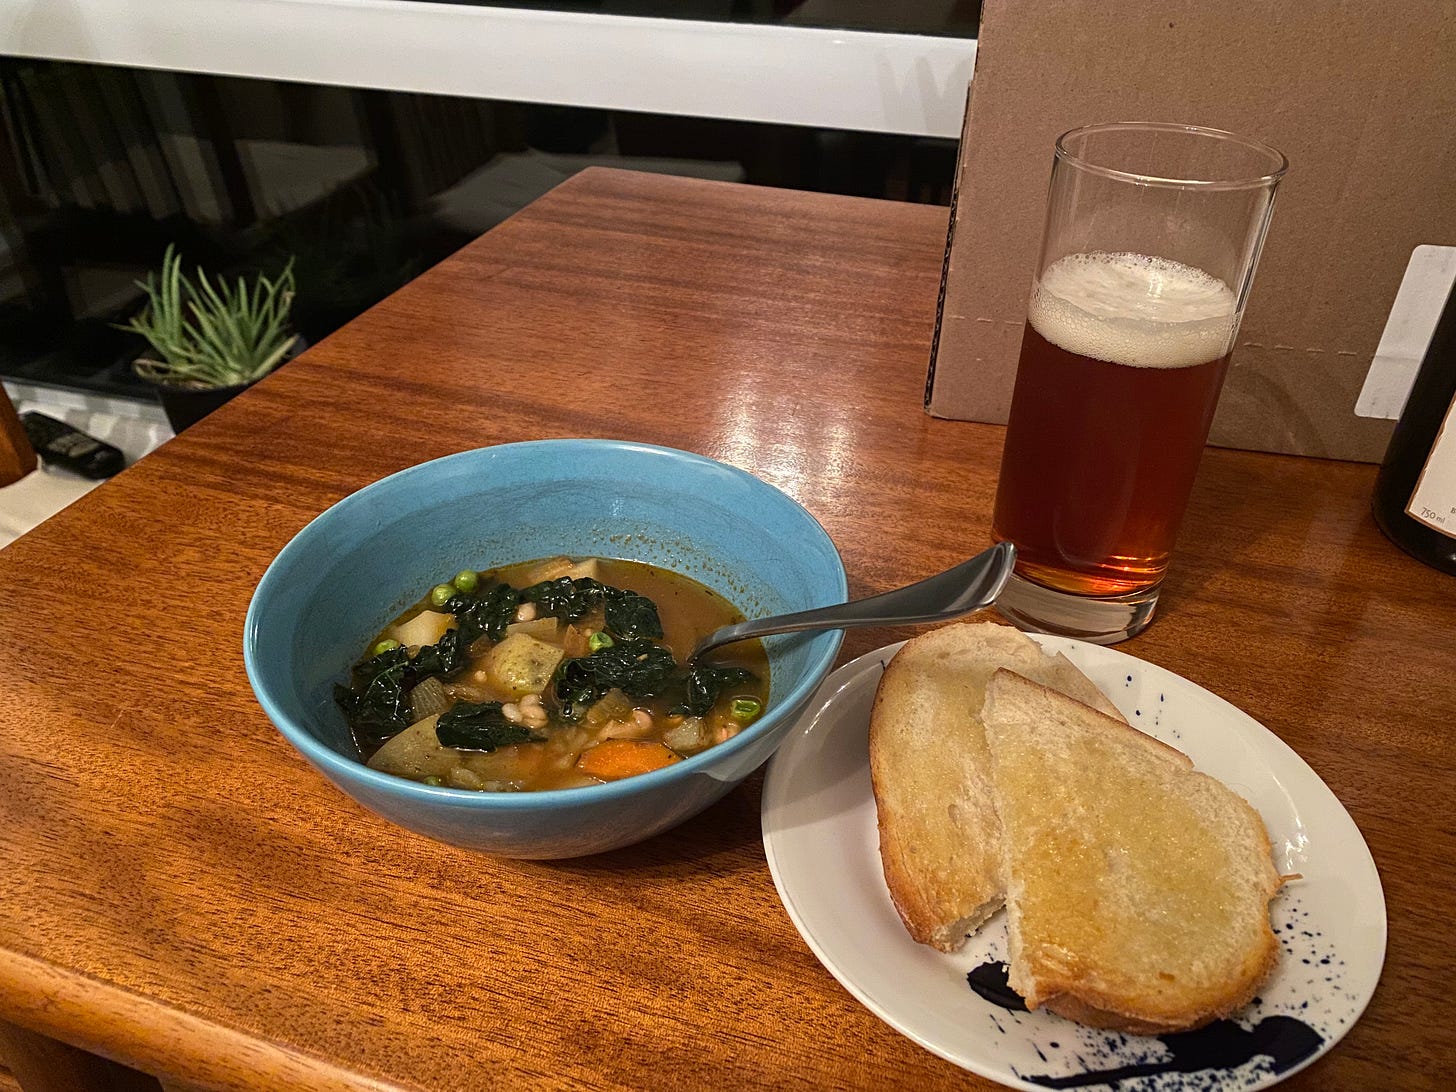 A blue bowl of chunky vegetable soup next to a small plate with buttered toast, and a tall glass half-full of beer behind them.